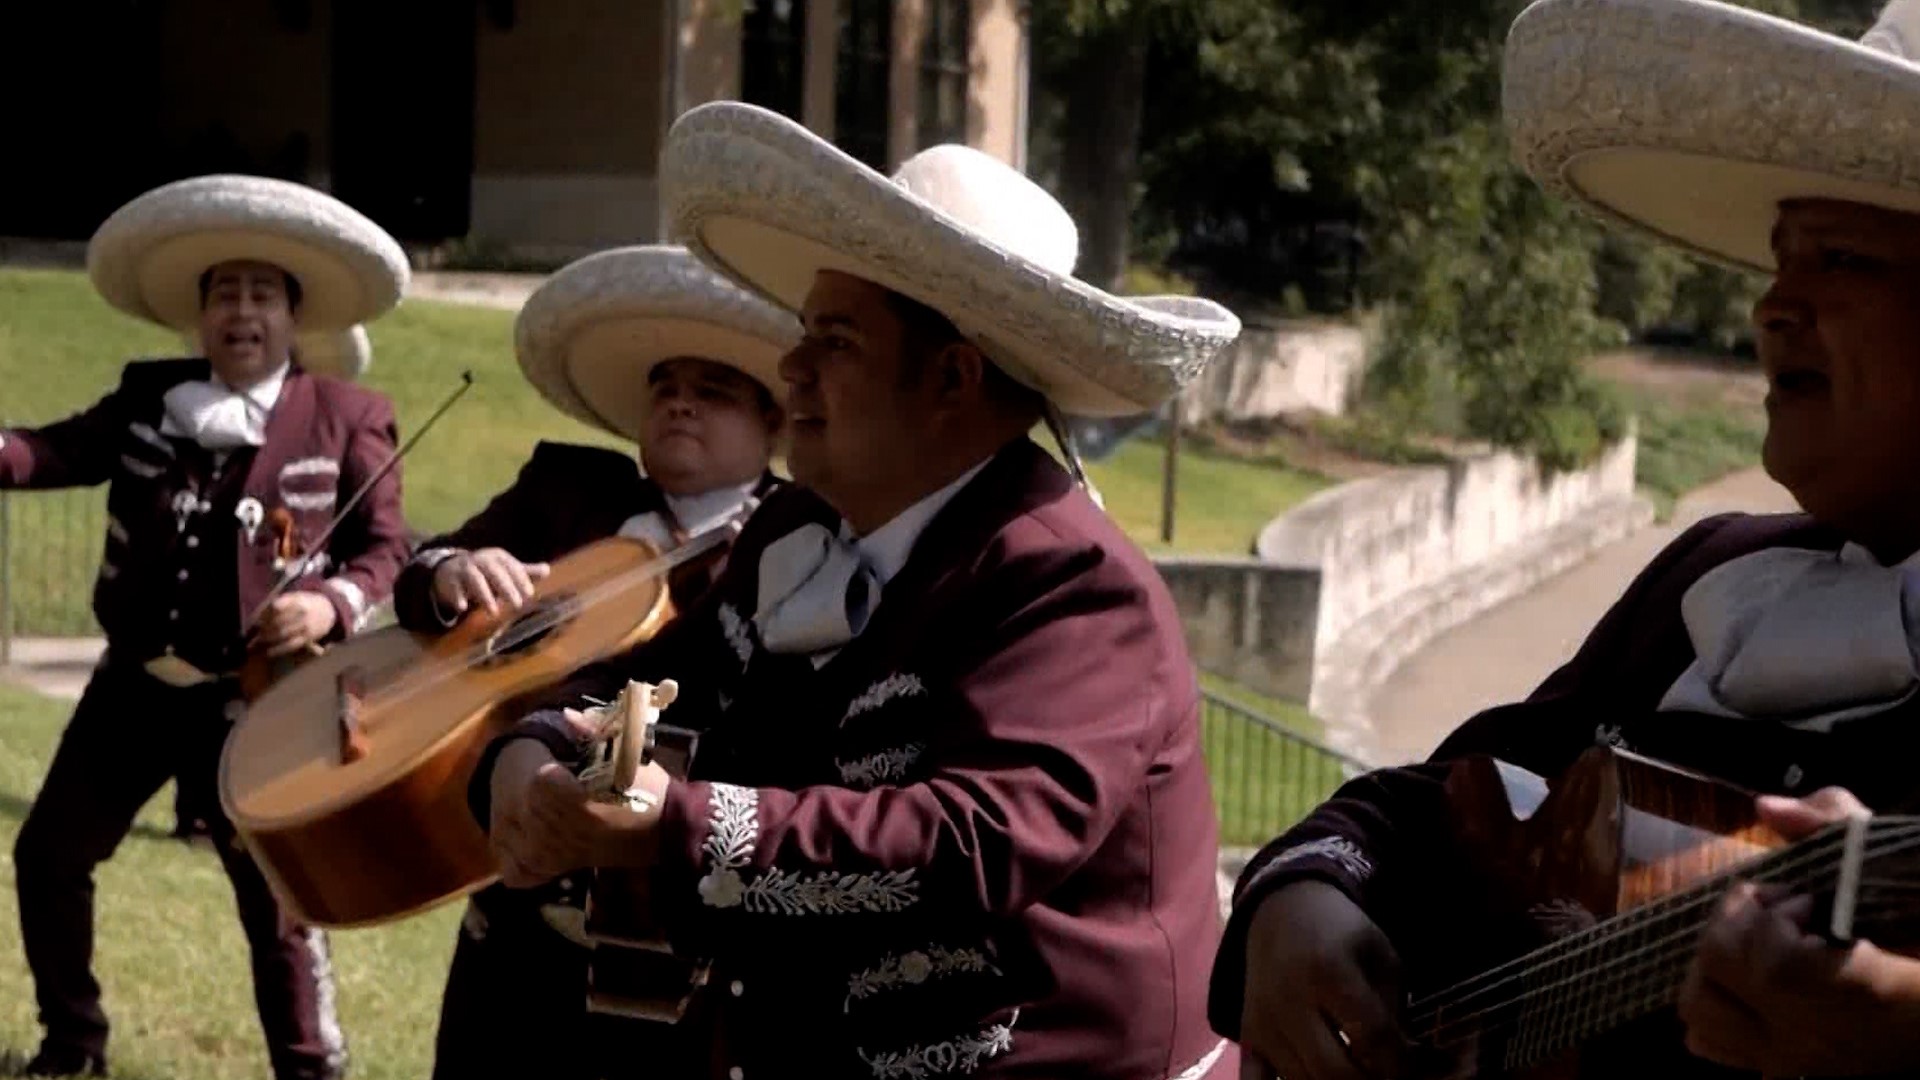 As 2020 celebrations got rebooked to 2021, so did mariachis. Pair the events that were pushed back with the new celebrations this year, groups are playing non-stop.